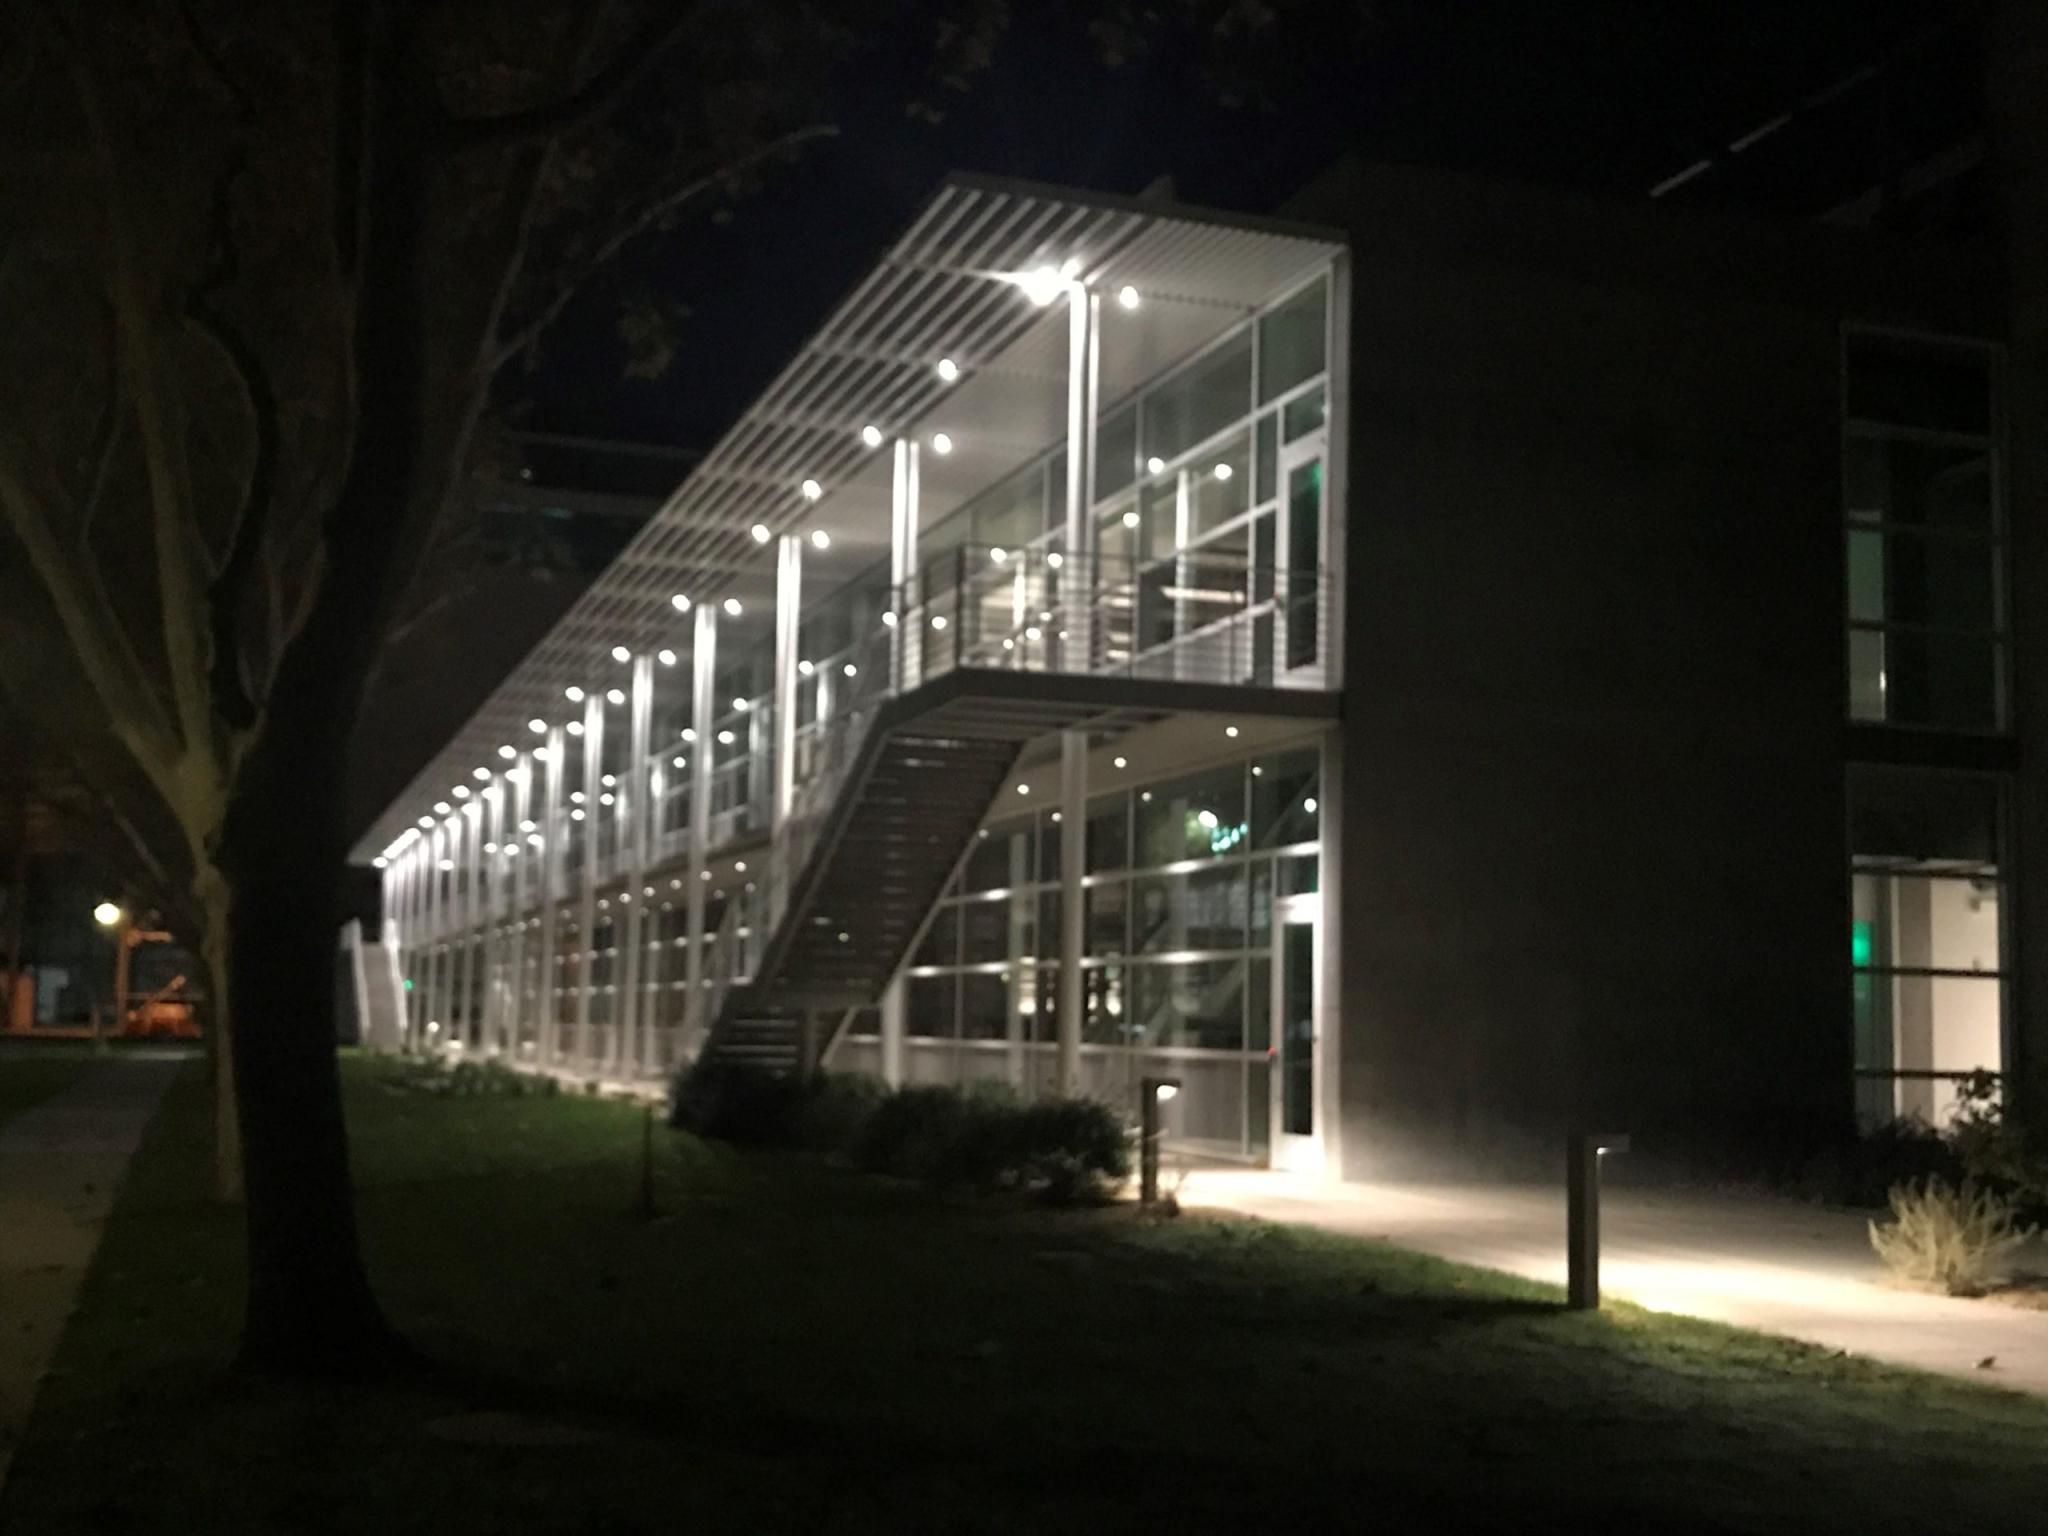 Exterior Picture of the NASA Ames Research Center Biosciences Laboratory at Night